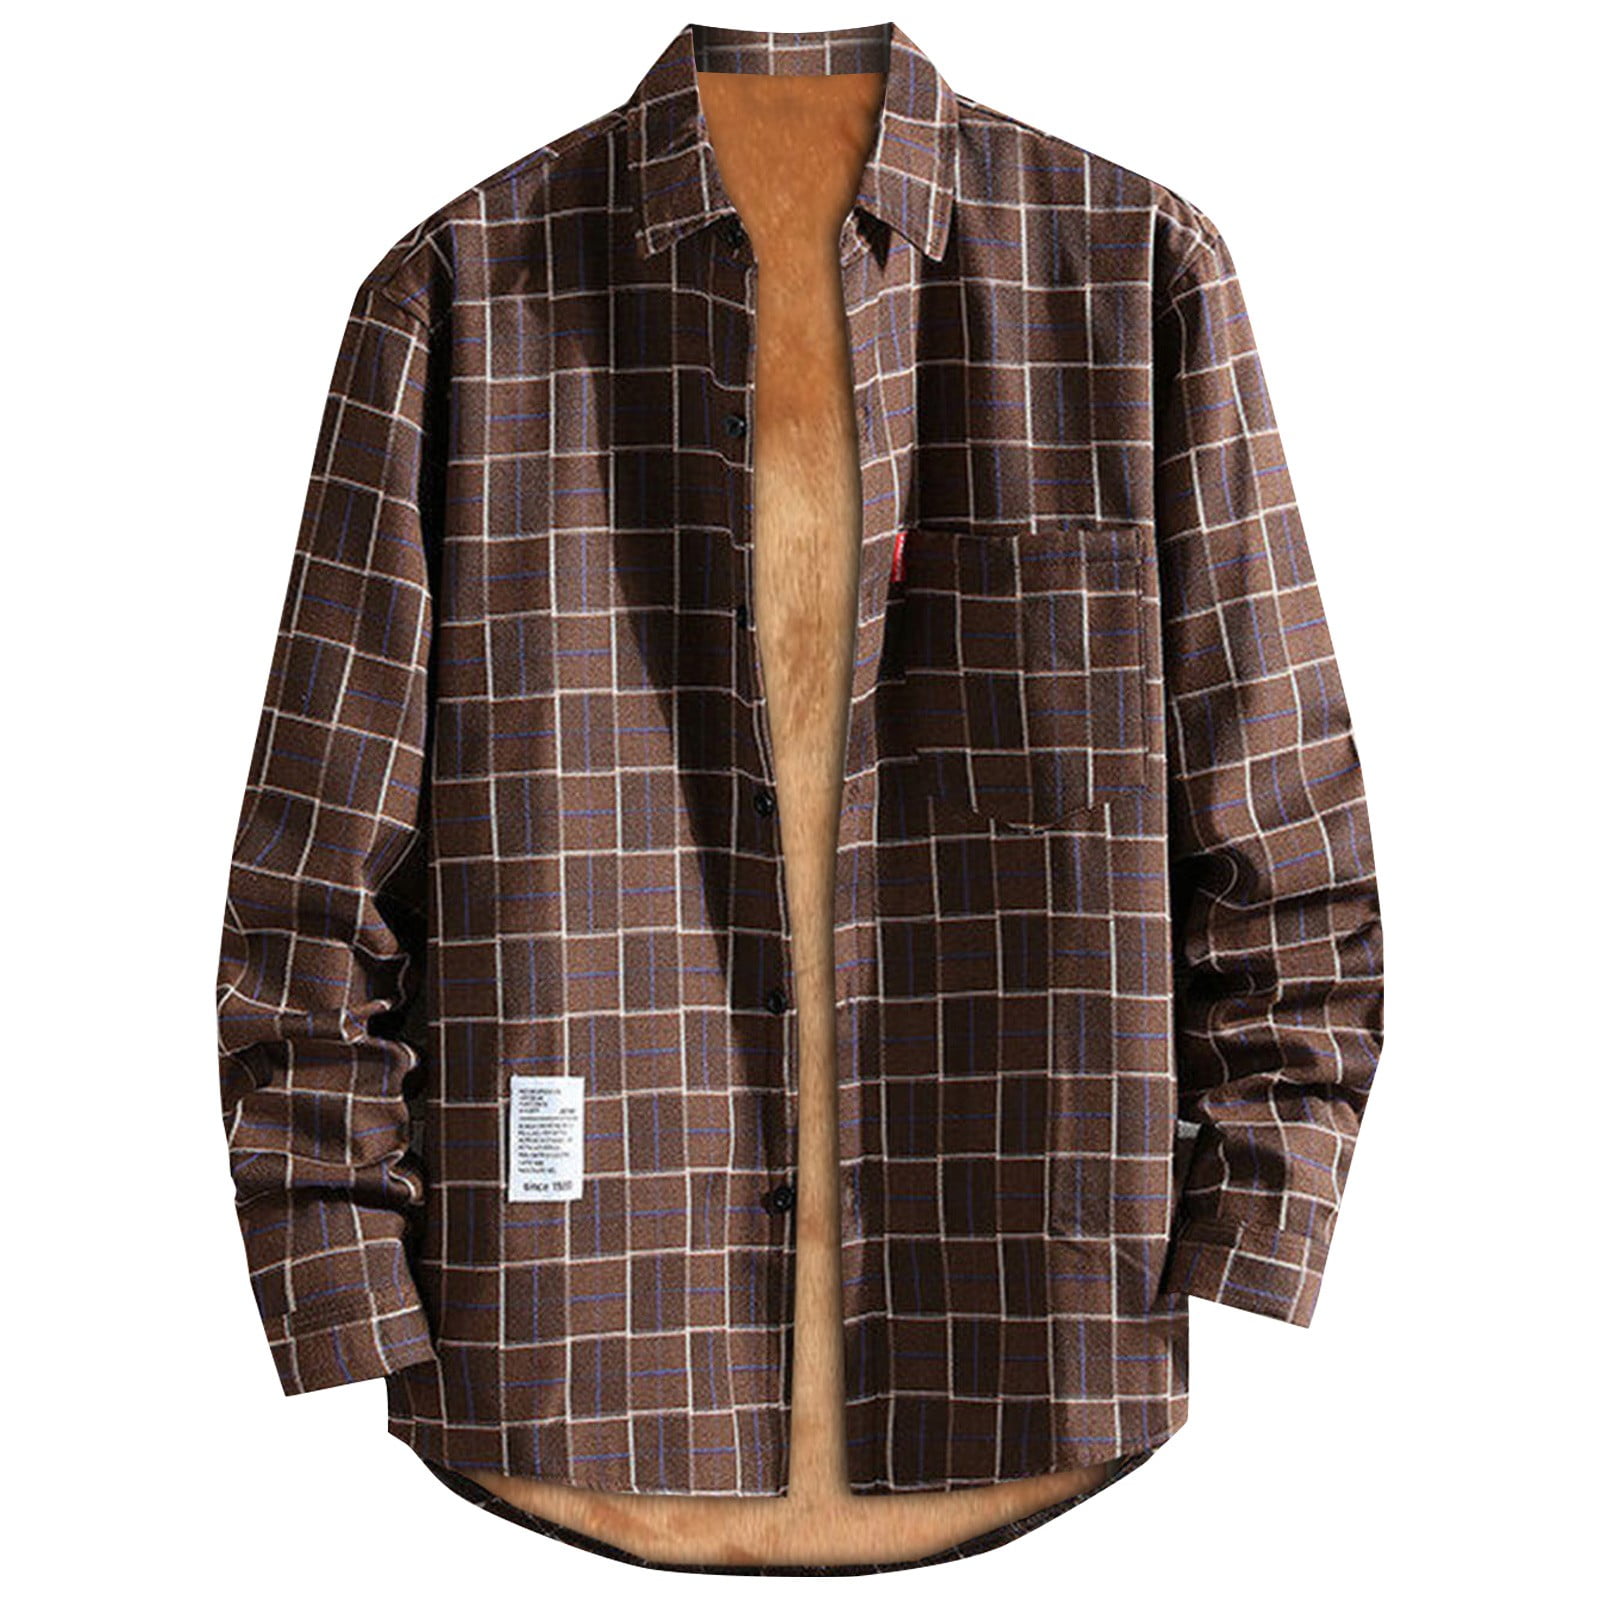 Men's Sherpa Lined Flannel Shirt Jacket, Soft Long Sleeve Rugged Plaid ...